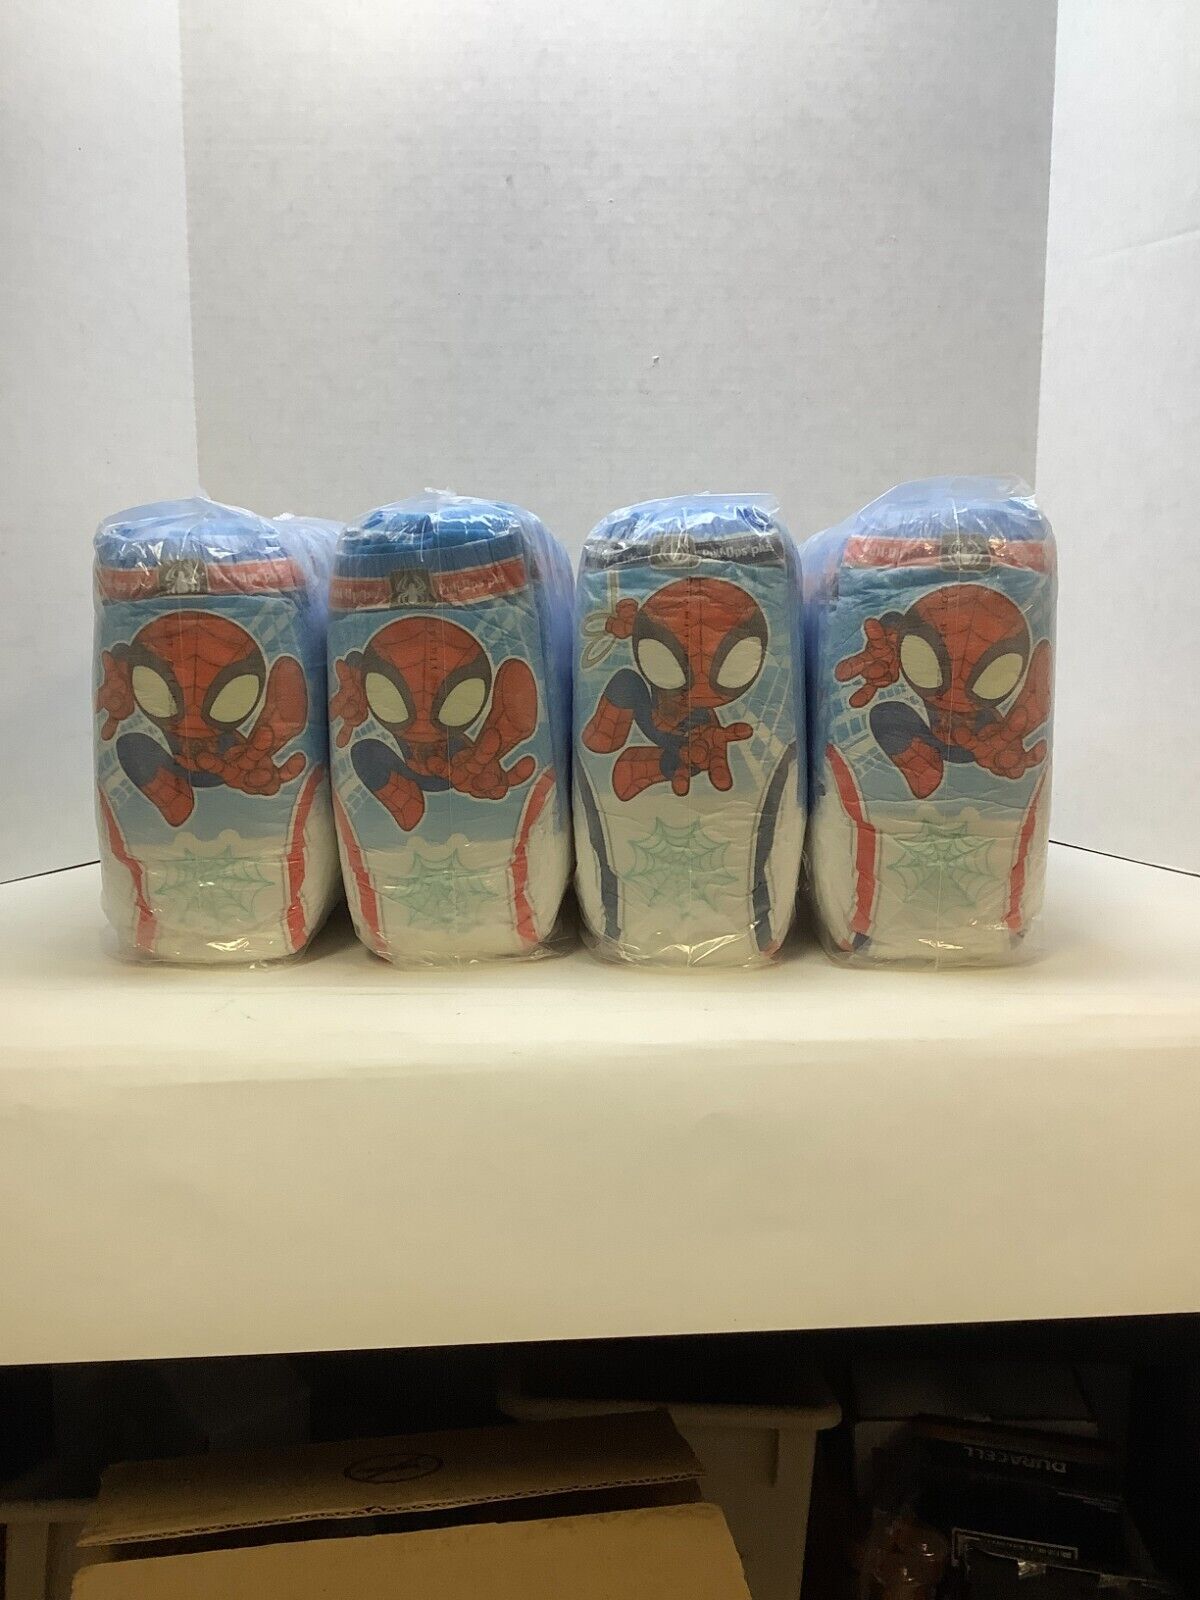 2T-3T Spider Man Pull Ups, 4 Packs, 121 Count Free Shipping Pull-Ups Does not apply